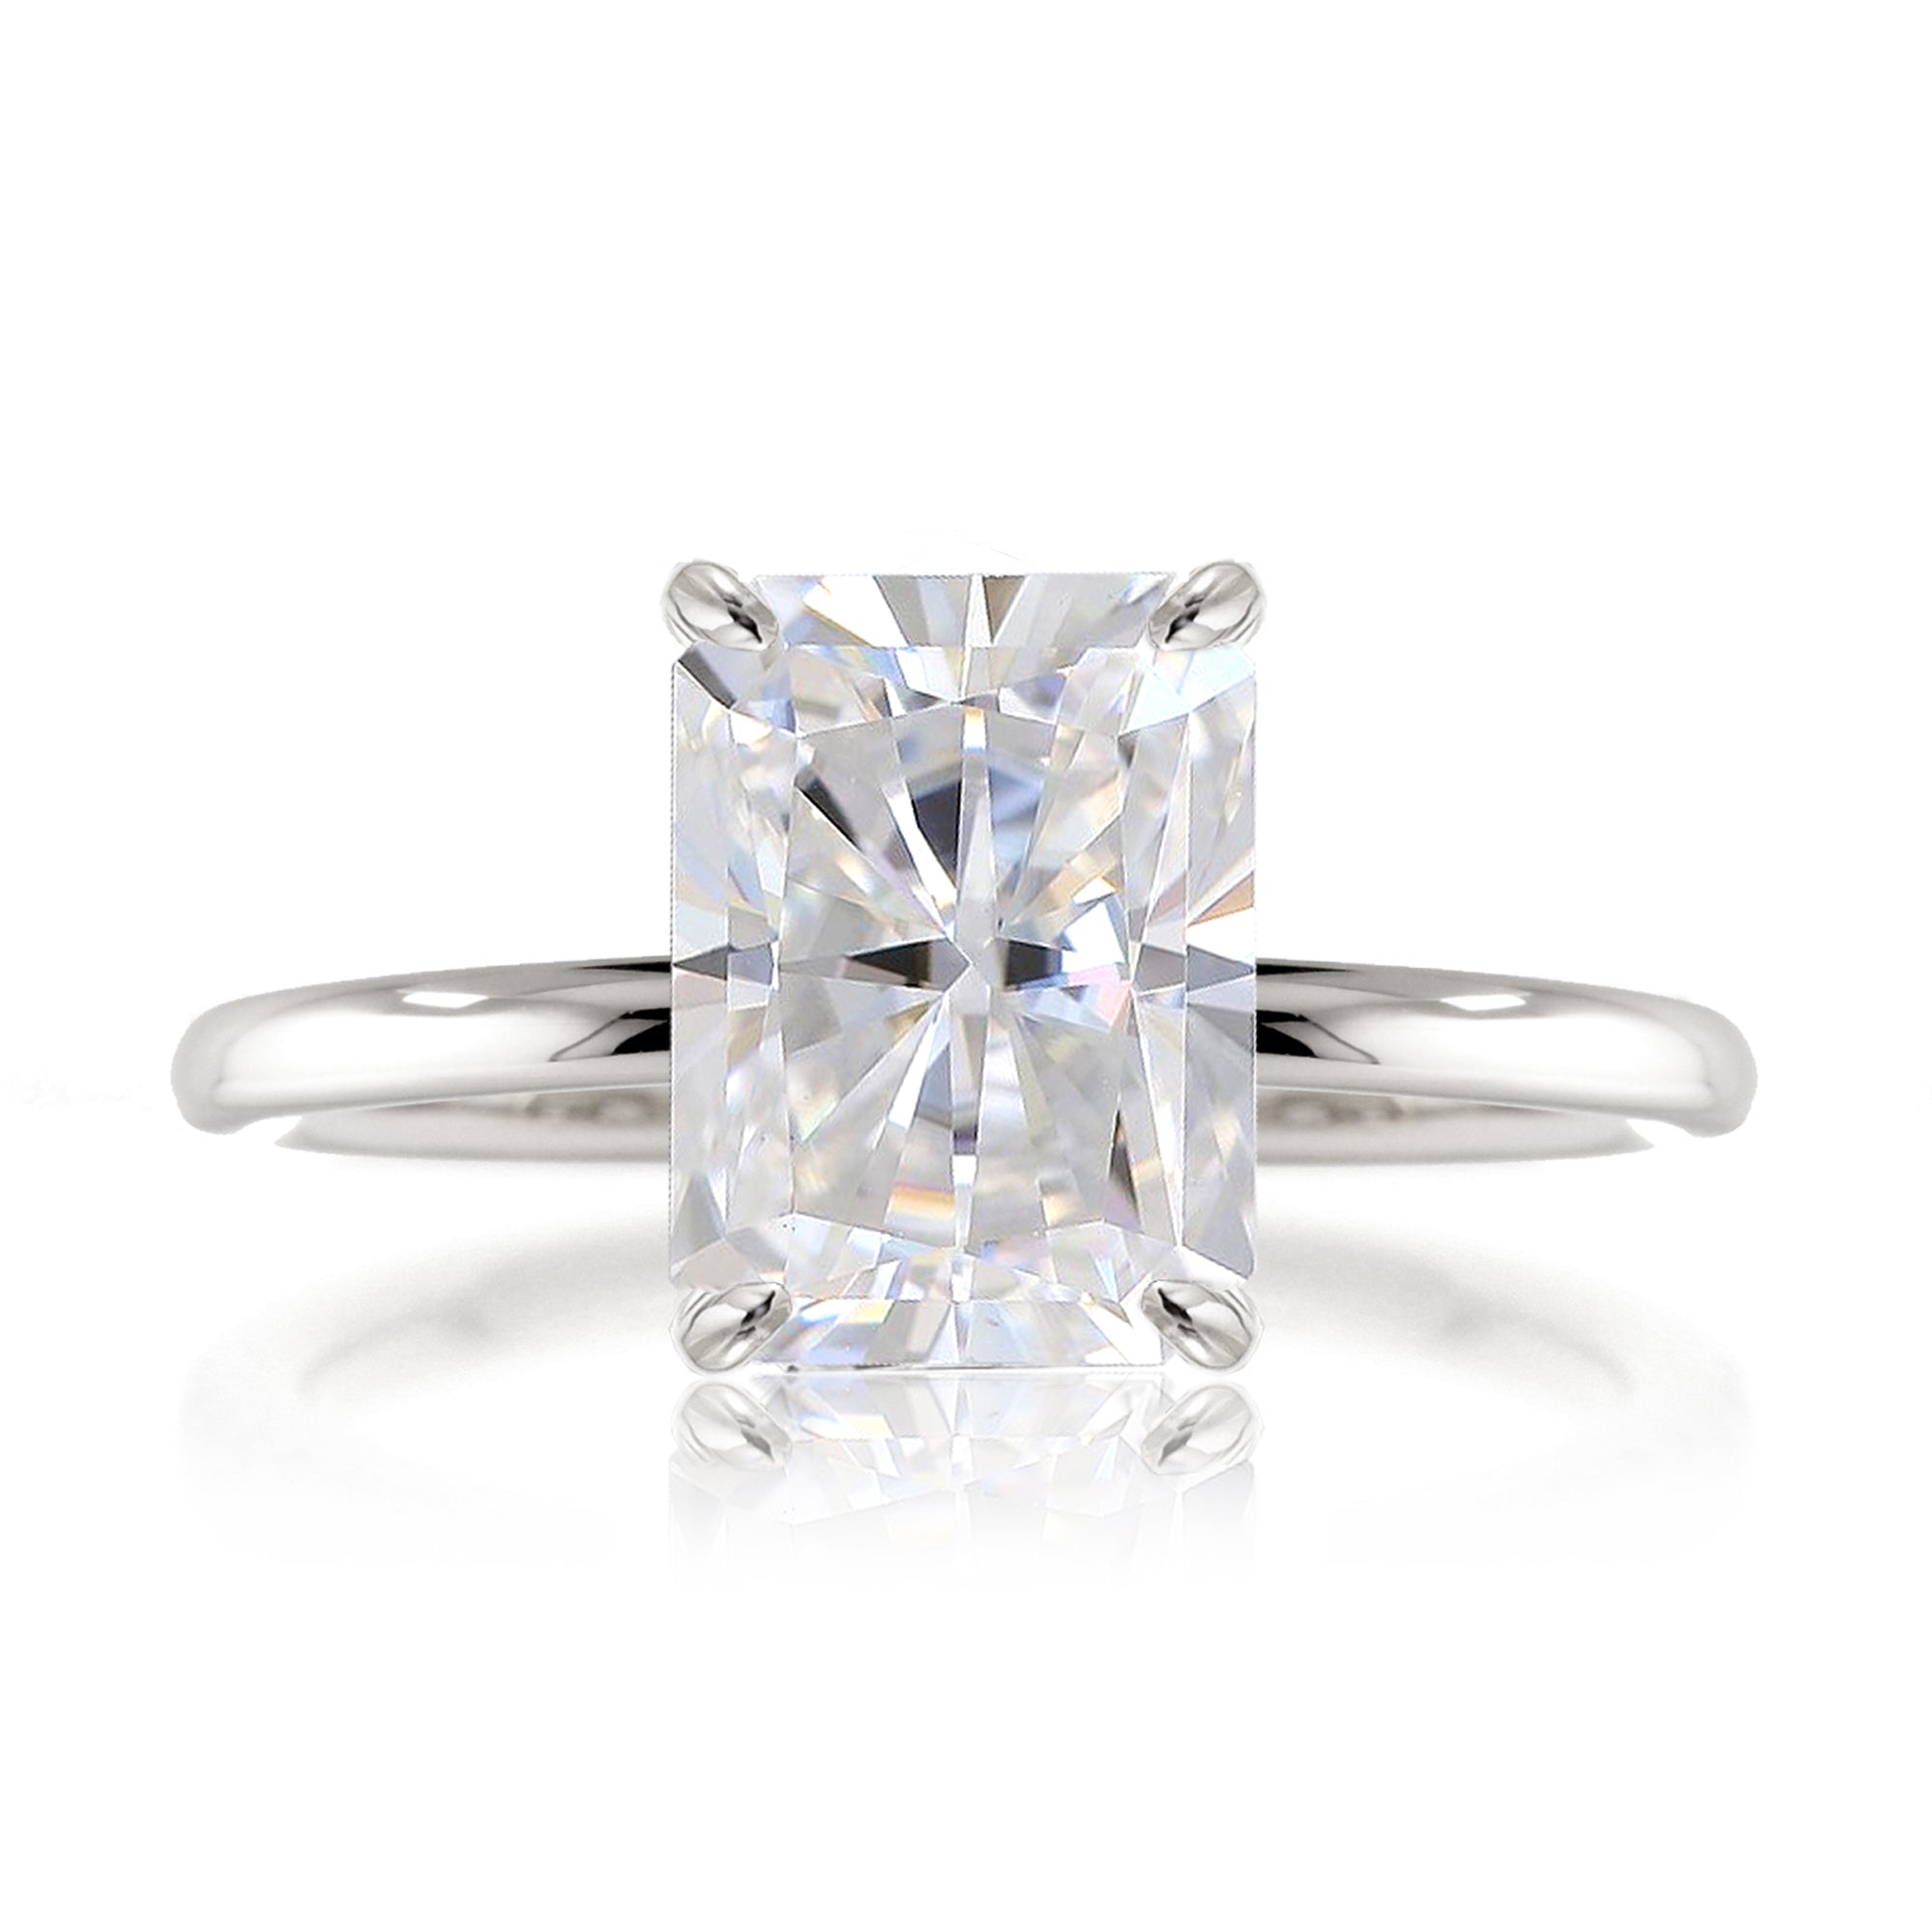 Radiant cut moissanite solid band engagement ring white gold - The Ava